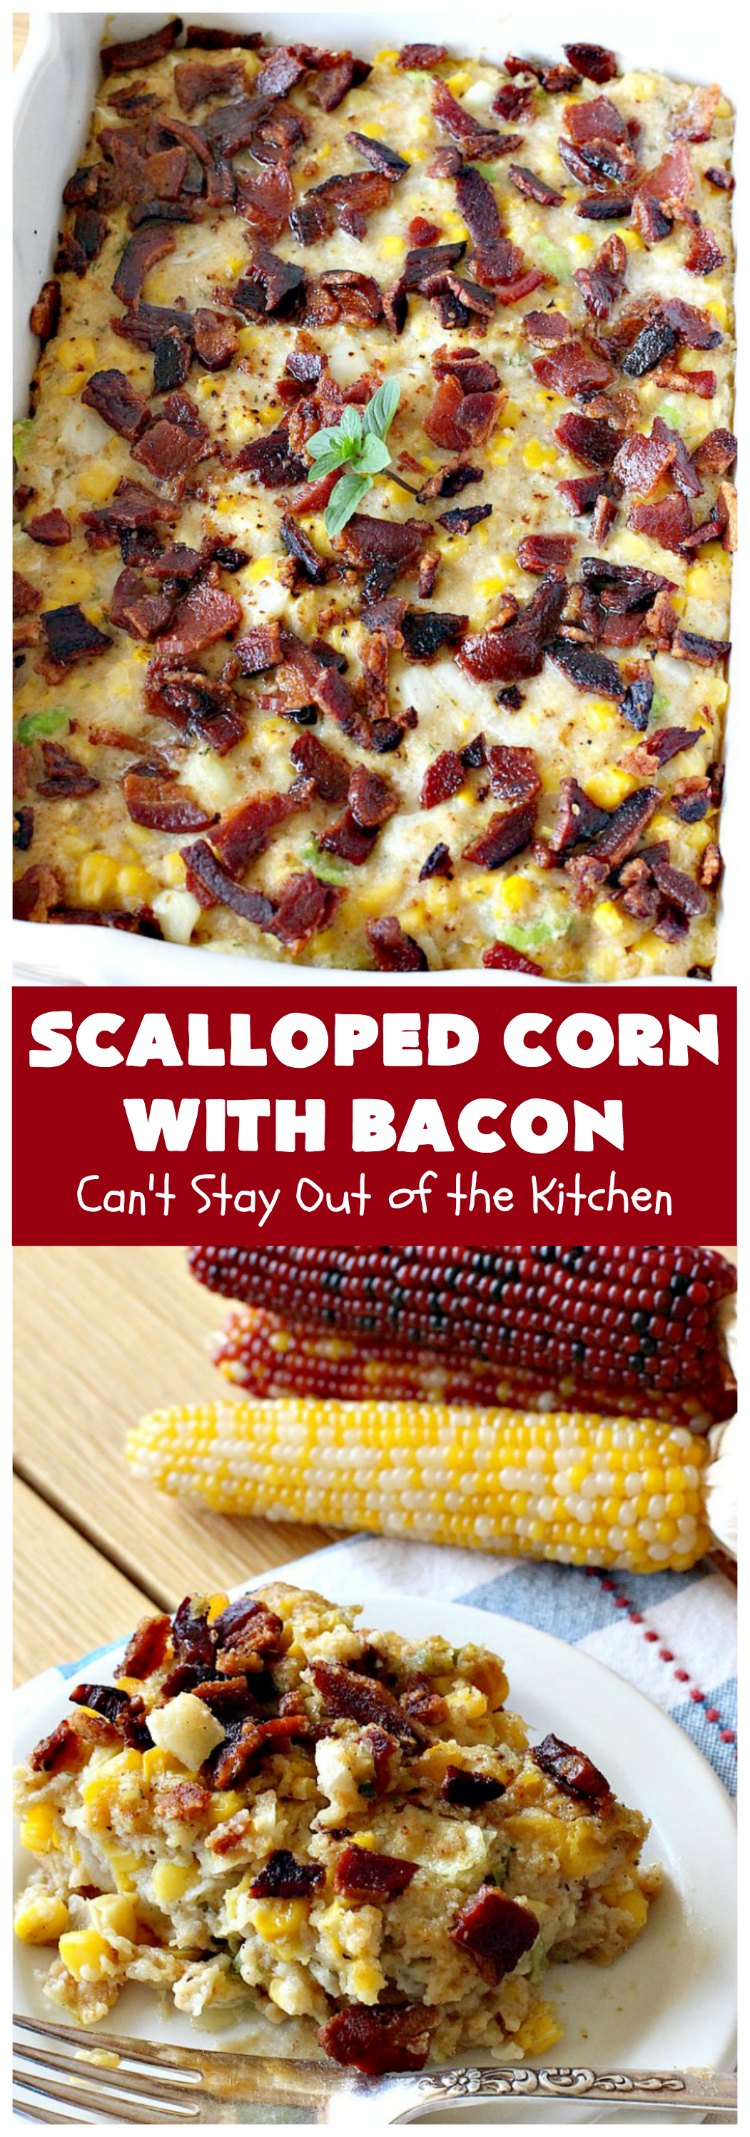 Scalloped Corn with Bacon | Can't Stay Out of the Kitchen